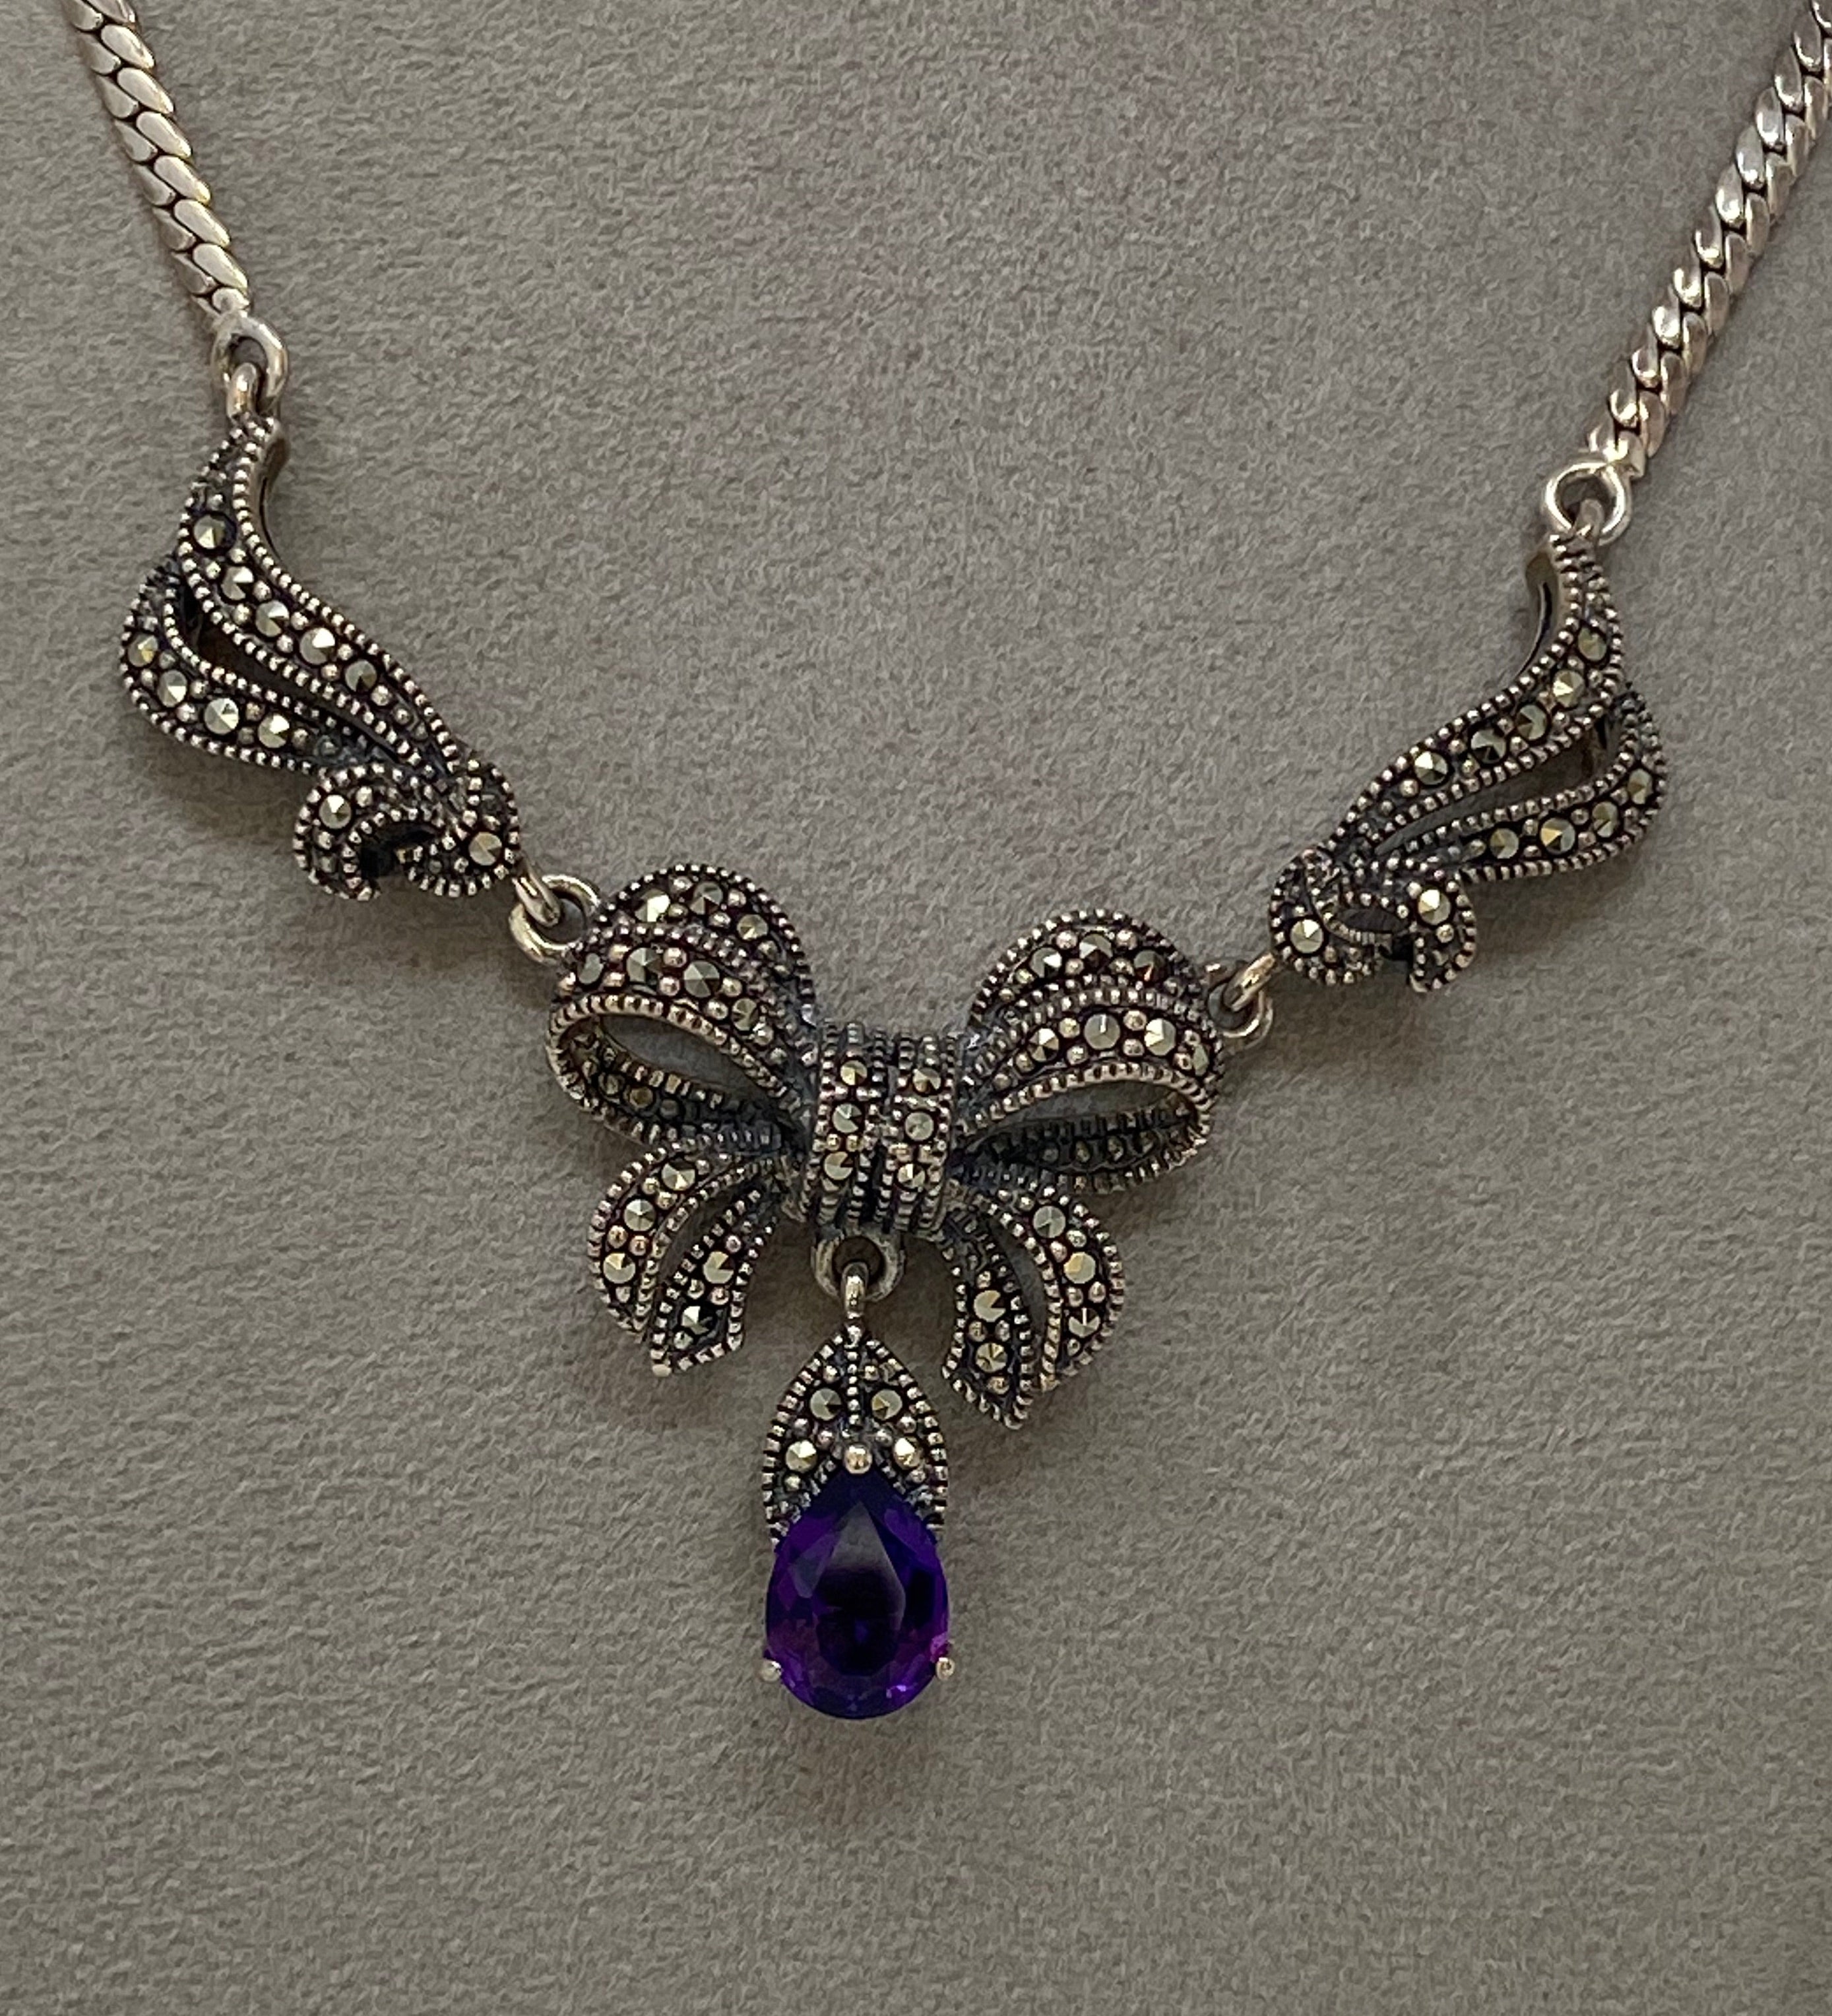 Silver, Amethyst and Marcasite Necklace